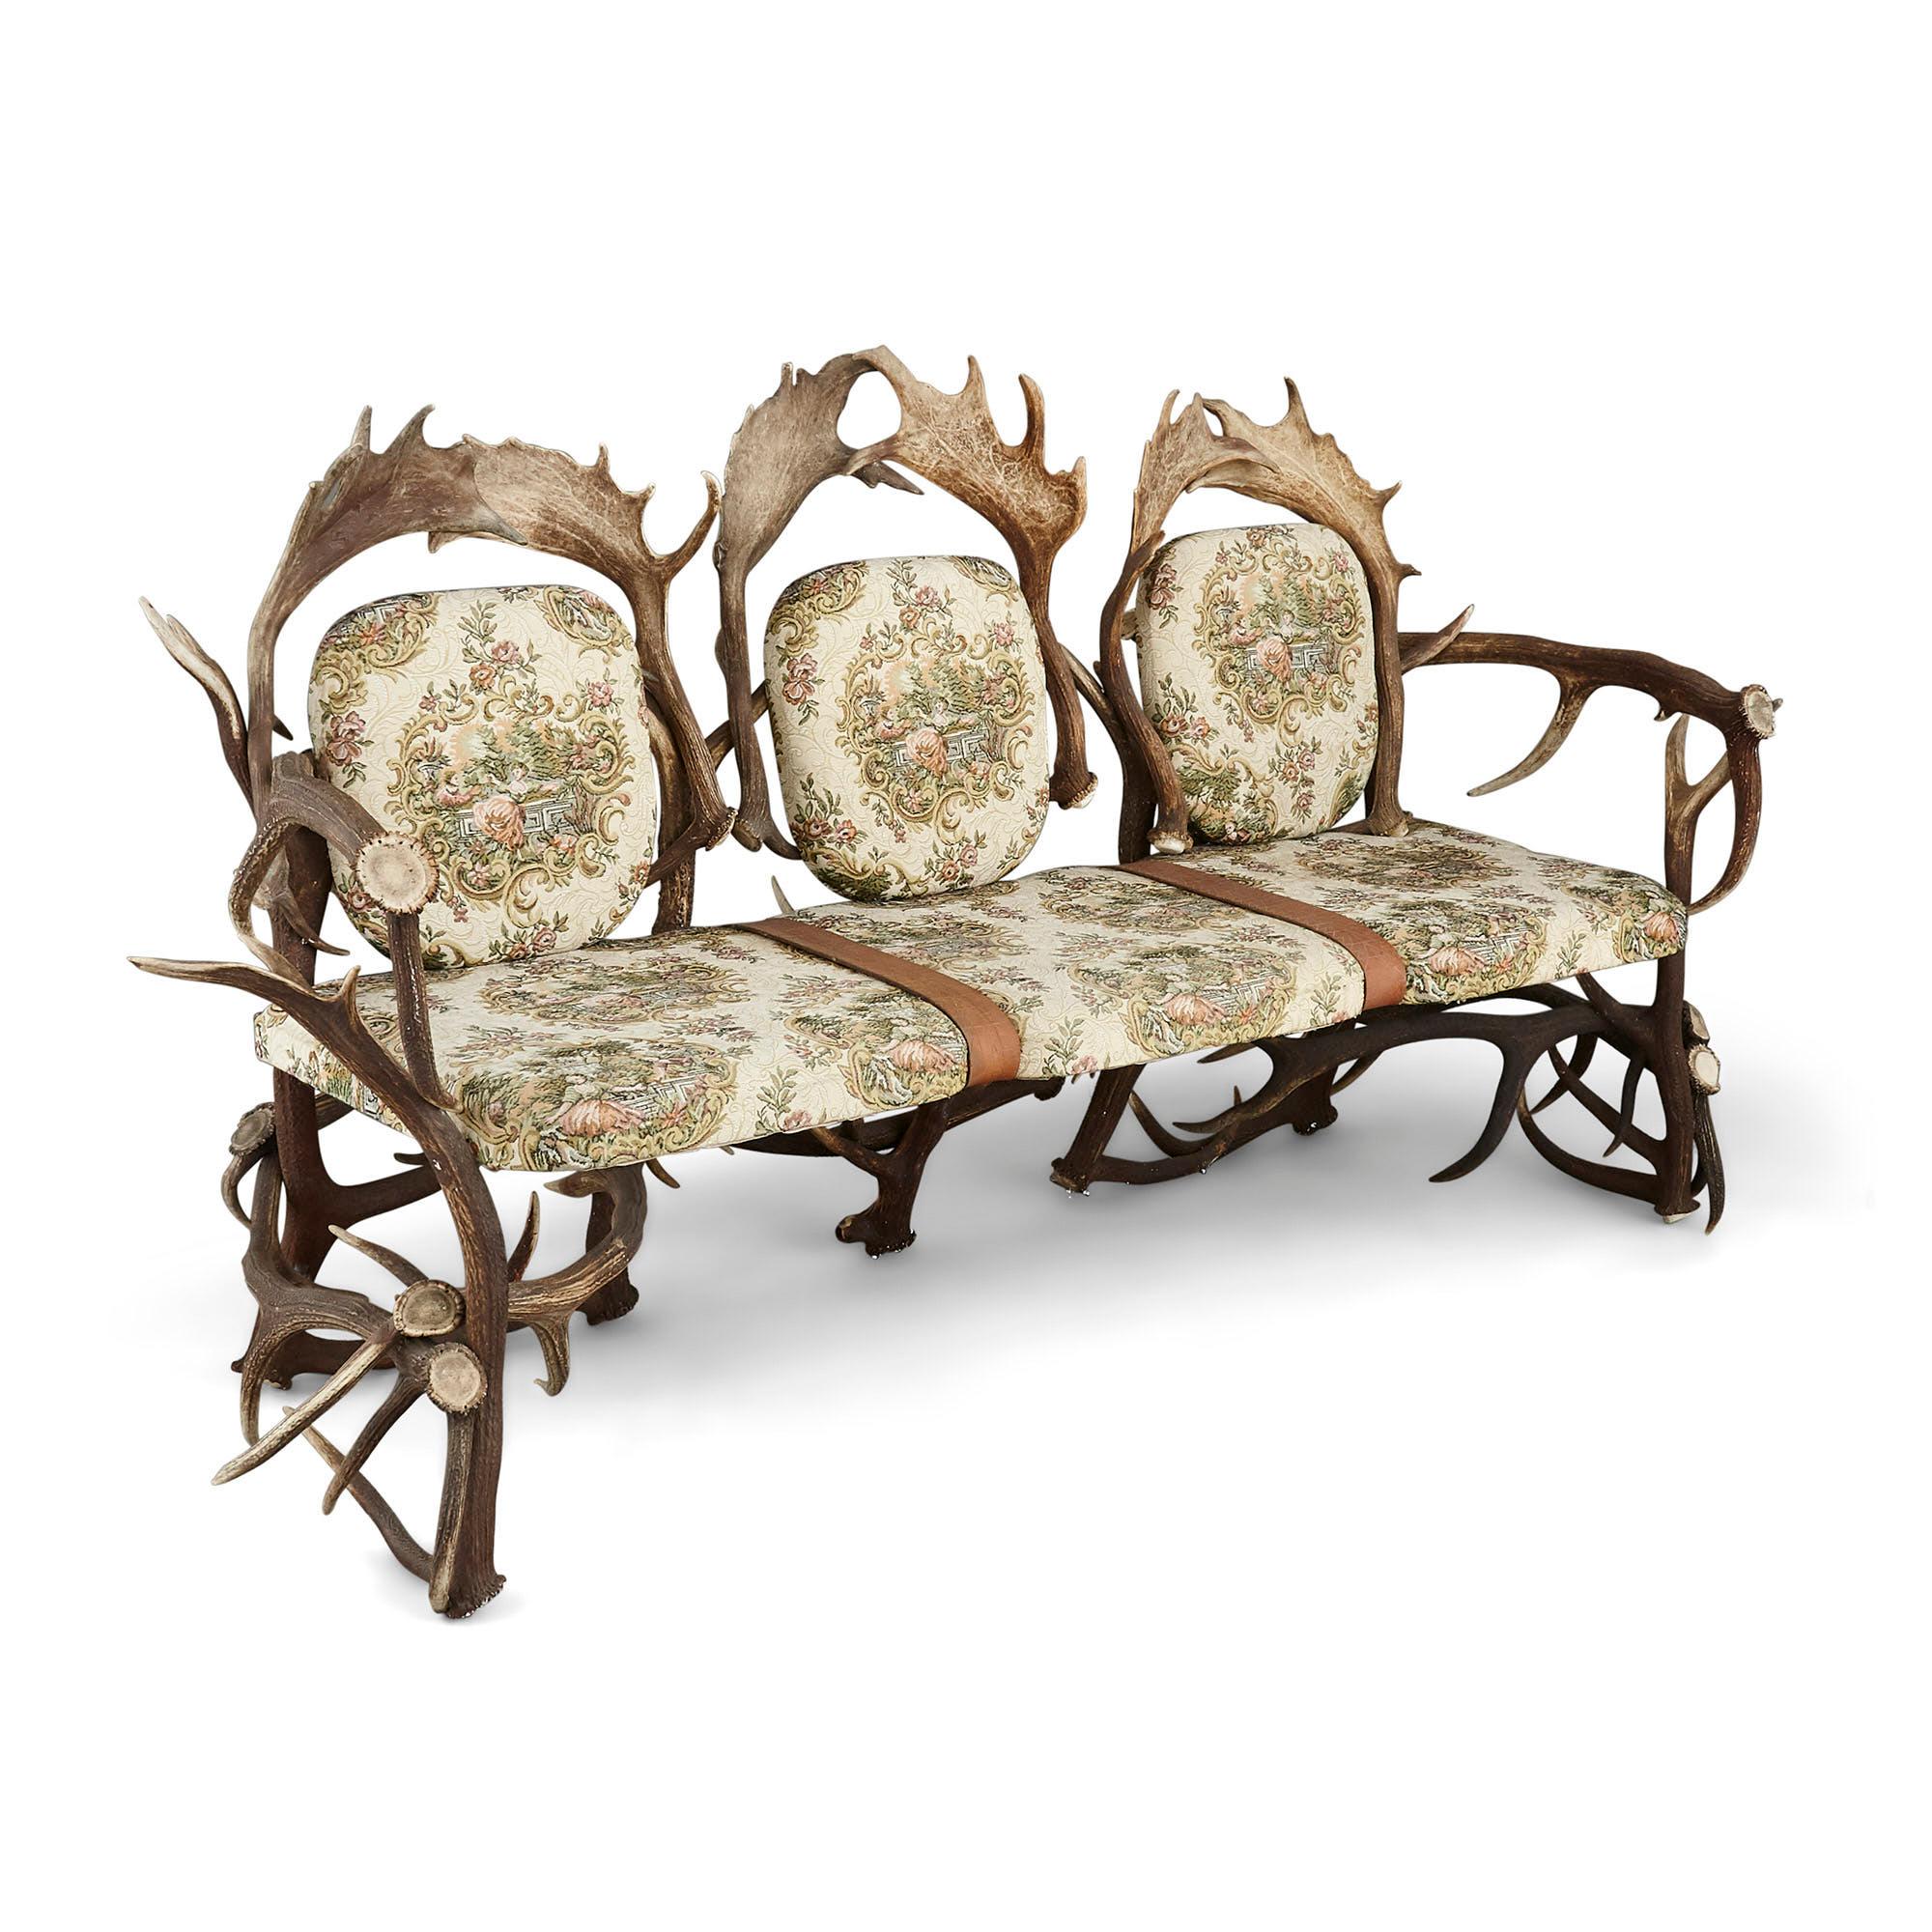 Antique German antler settee with Rococo style upholstery
German, early 20th century
Dimensions: Height 108cm, width 212cm, depth 80cm

This unusual sofa, an example of 'antler-seat furniture', was likely crafted in Germany in the early 20th